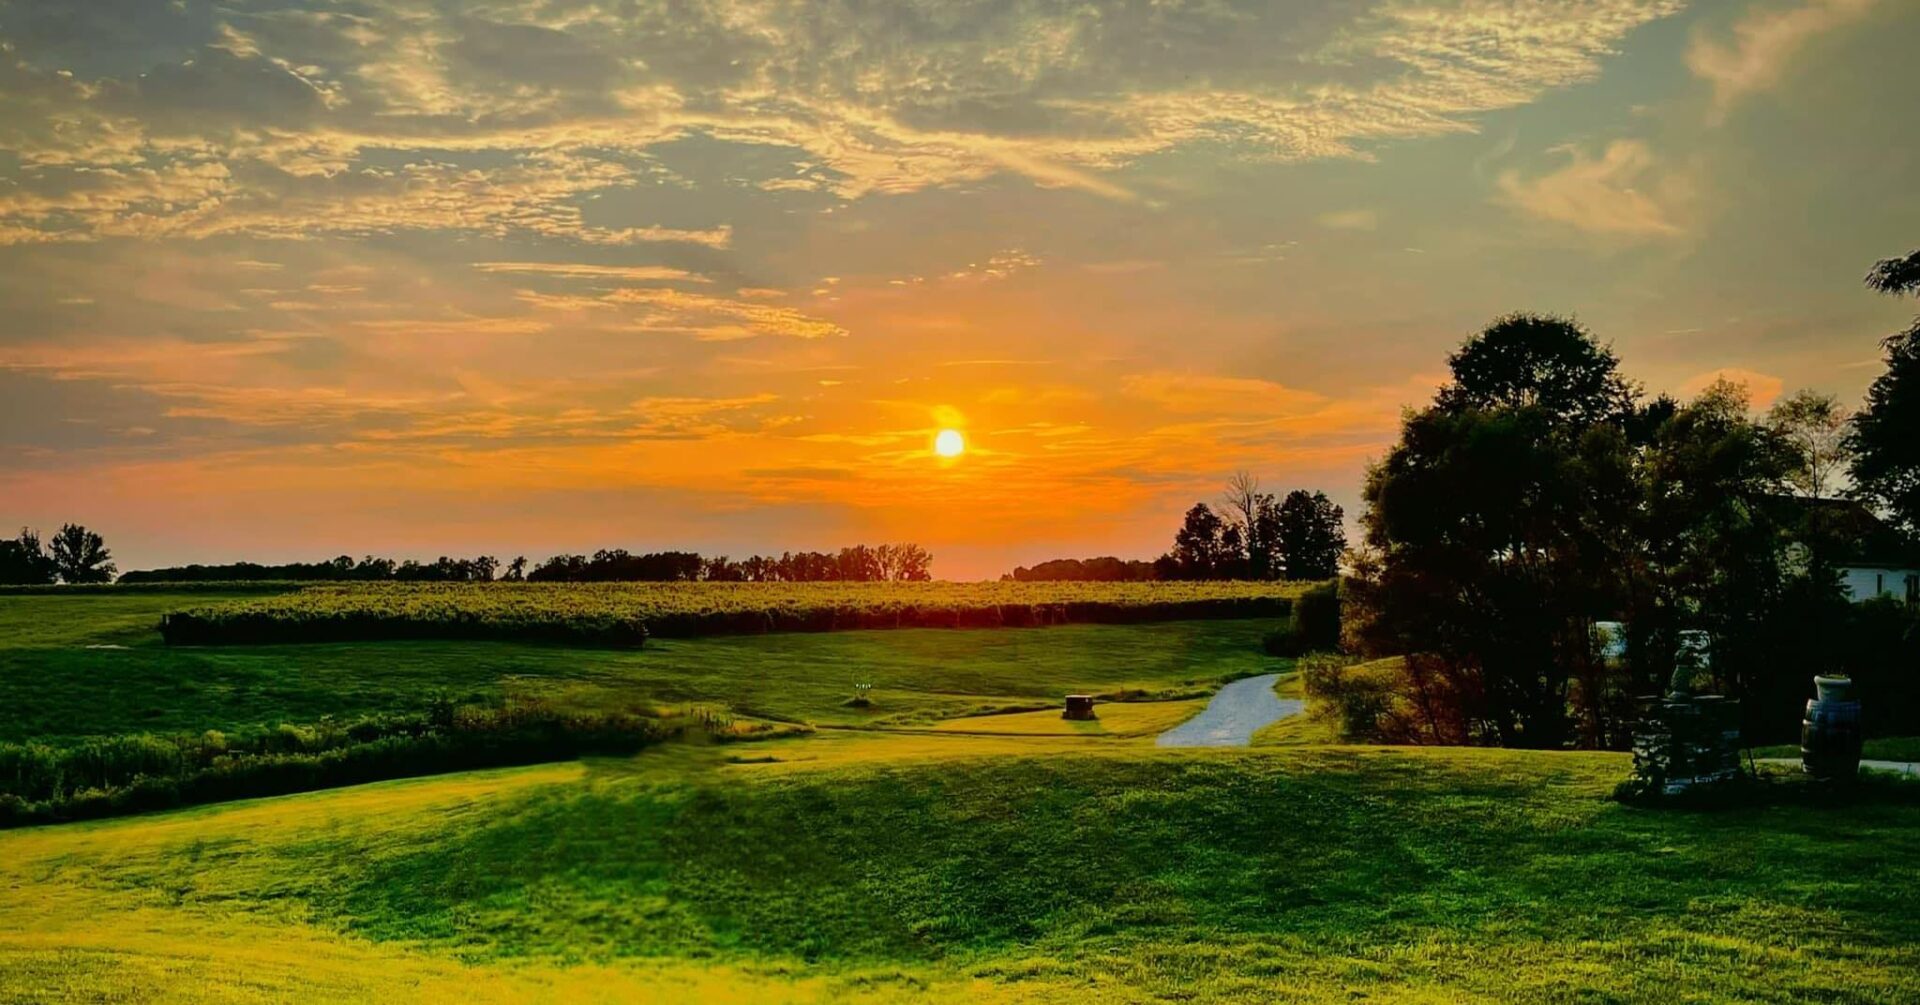 A sunset over the grass and trees of a golf course.